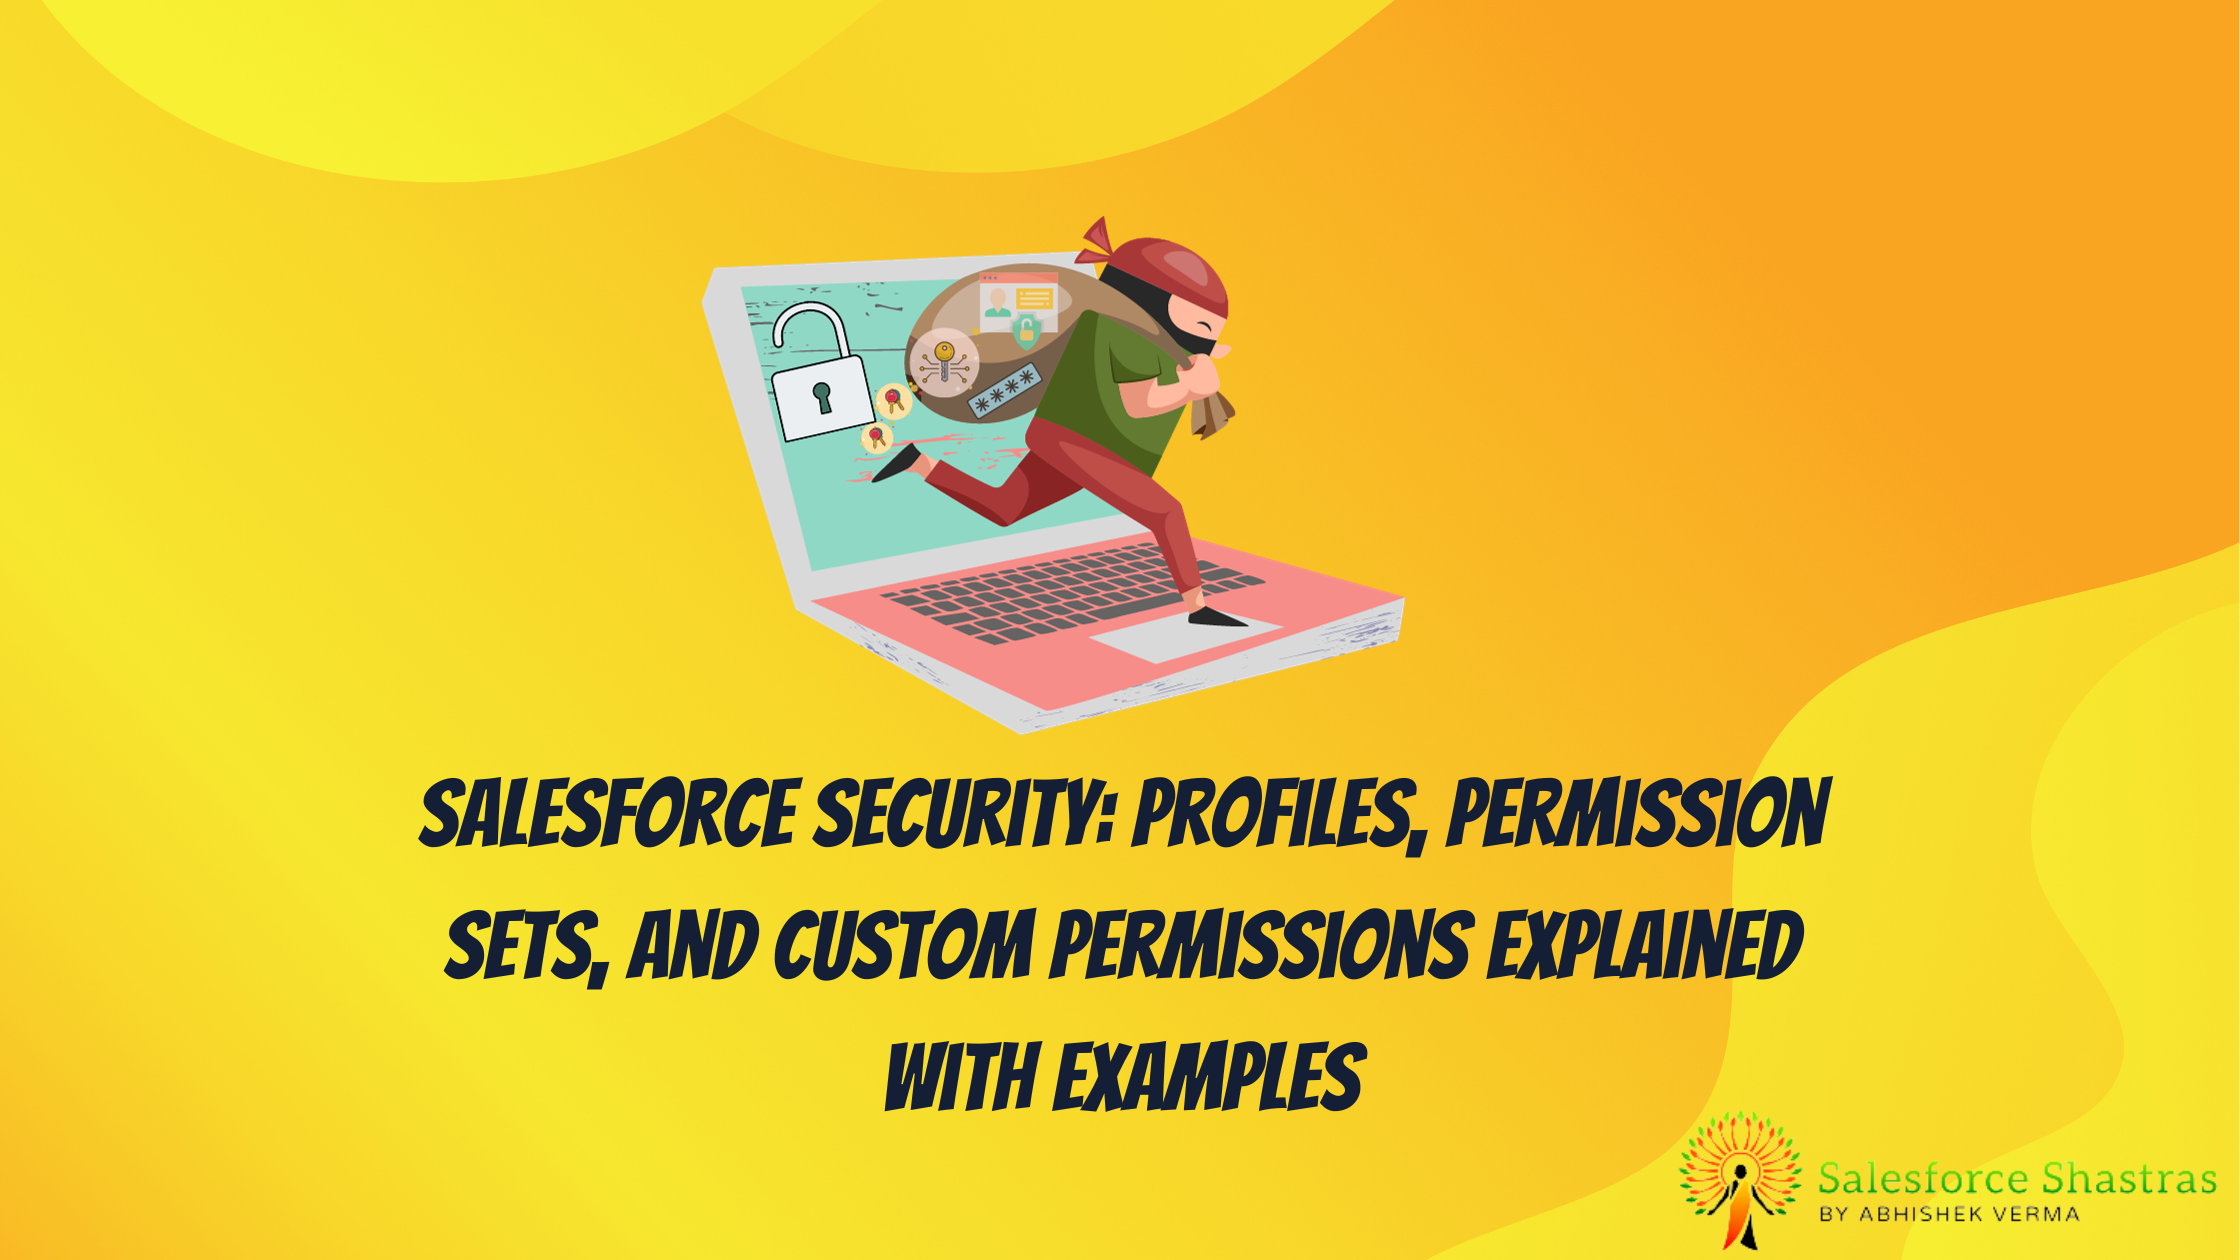 Salesforce Security: Profiles, Permission Sets, and Custom Permissions Explained with examples